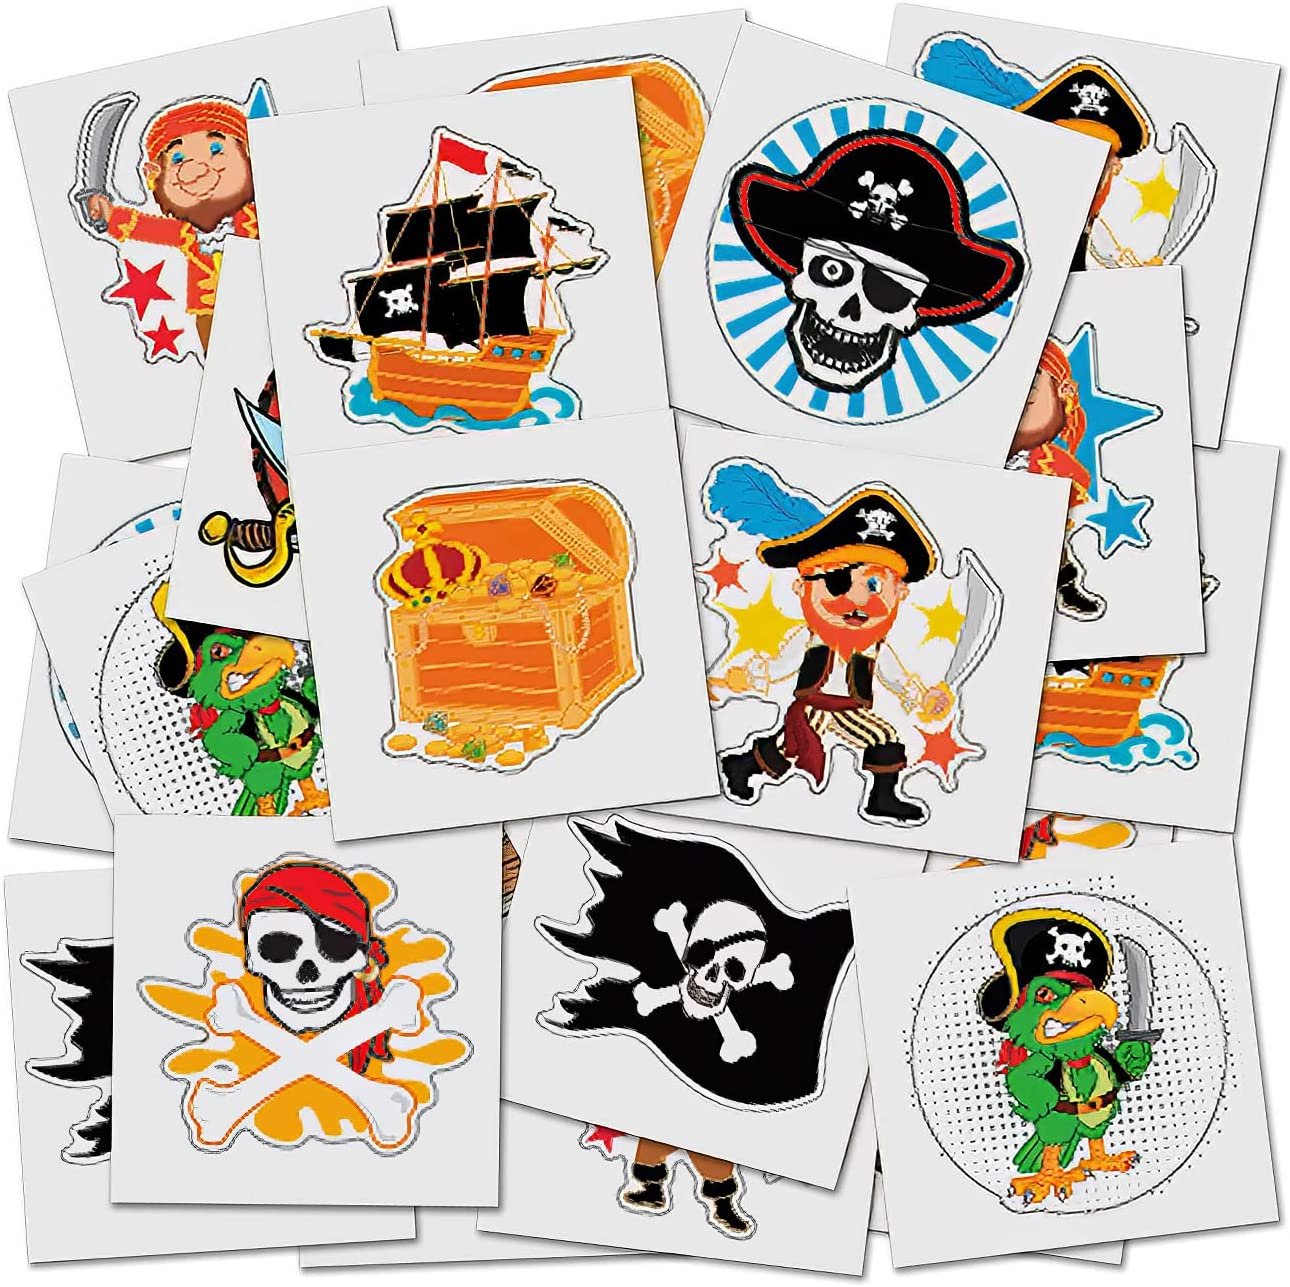 ArtCreativity Pirate Temporary Tattoos for Kids - Bulk Pack of 144 in Assorted Designs, Non-Toxic 2 Inch Tats, Birthday Party Favors, Goodie Bag Fillers, Non-Candy Halloween Treats